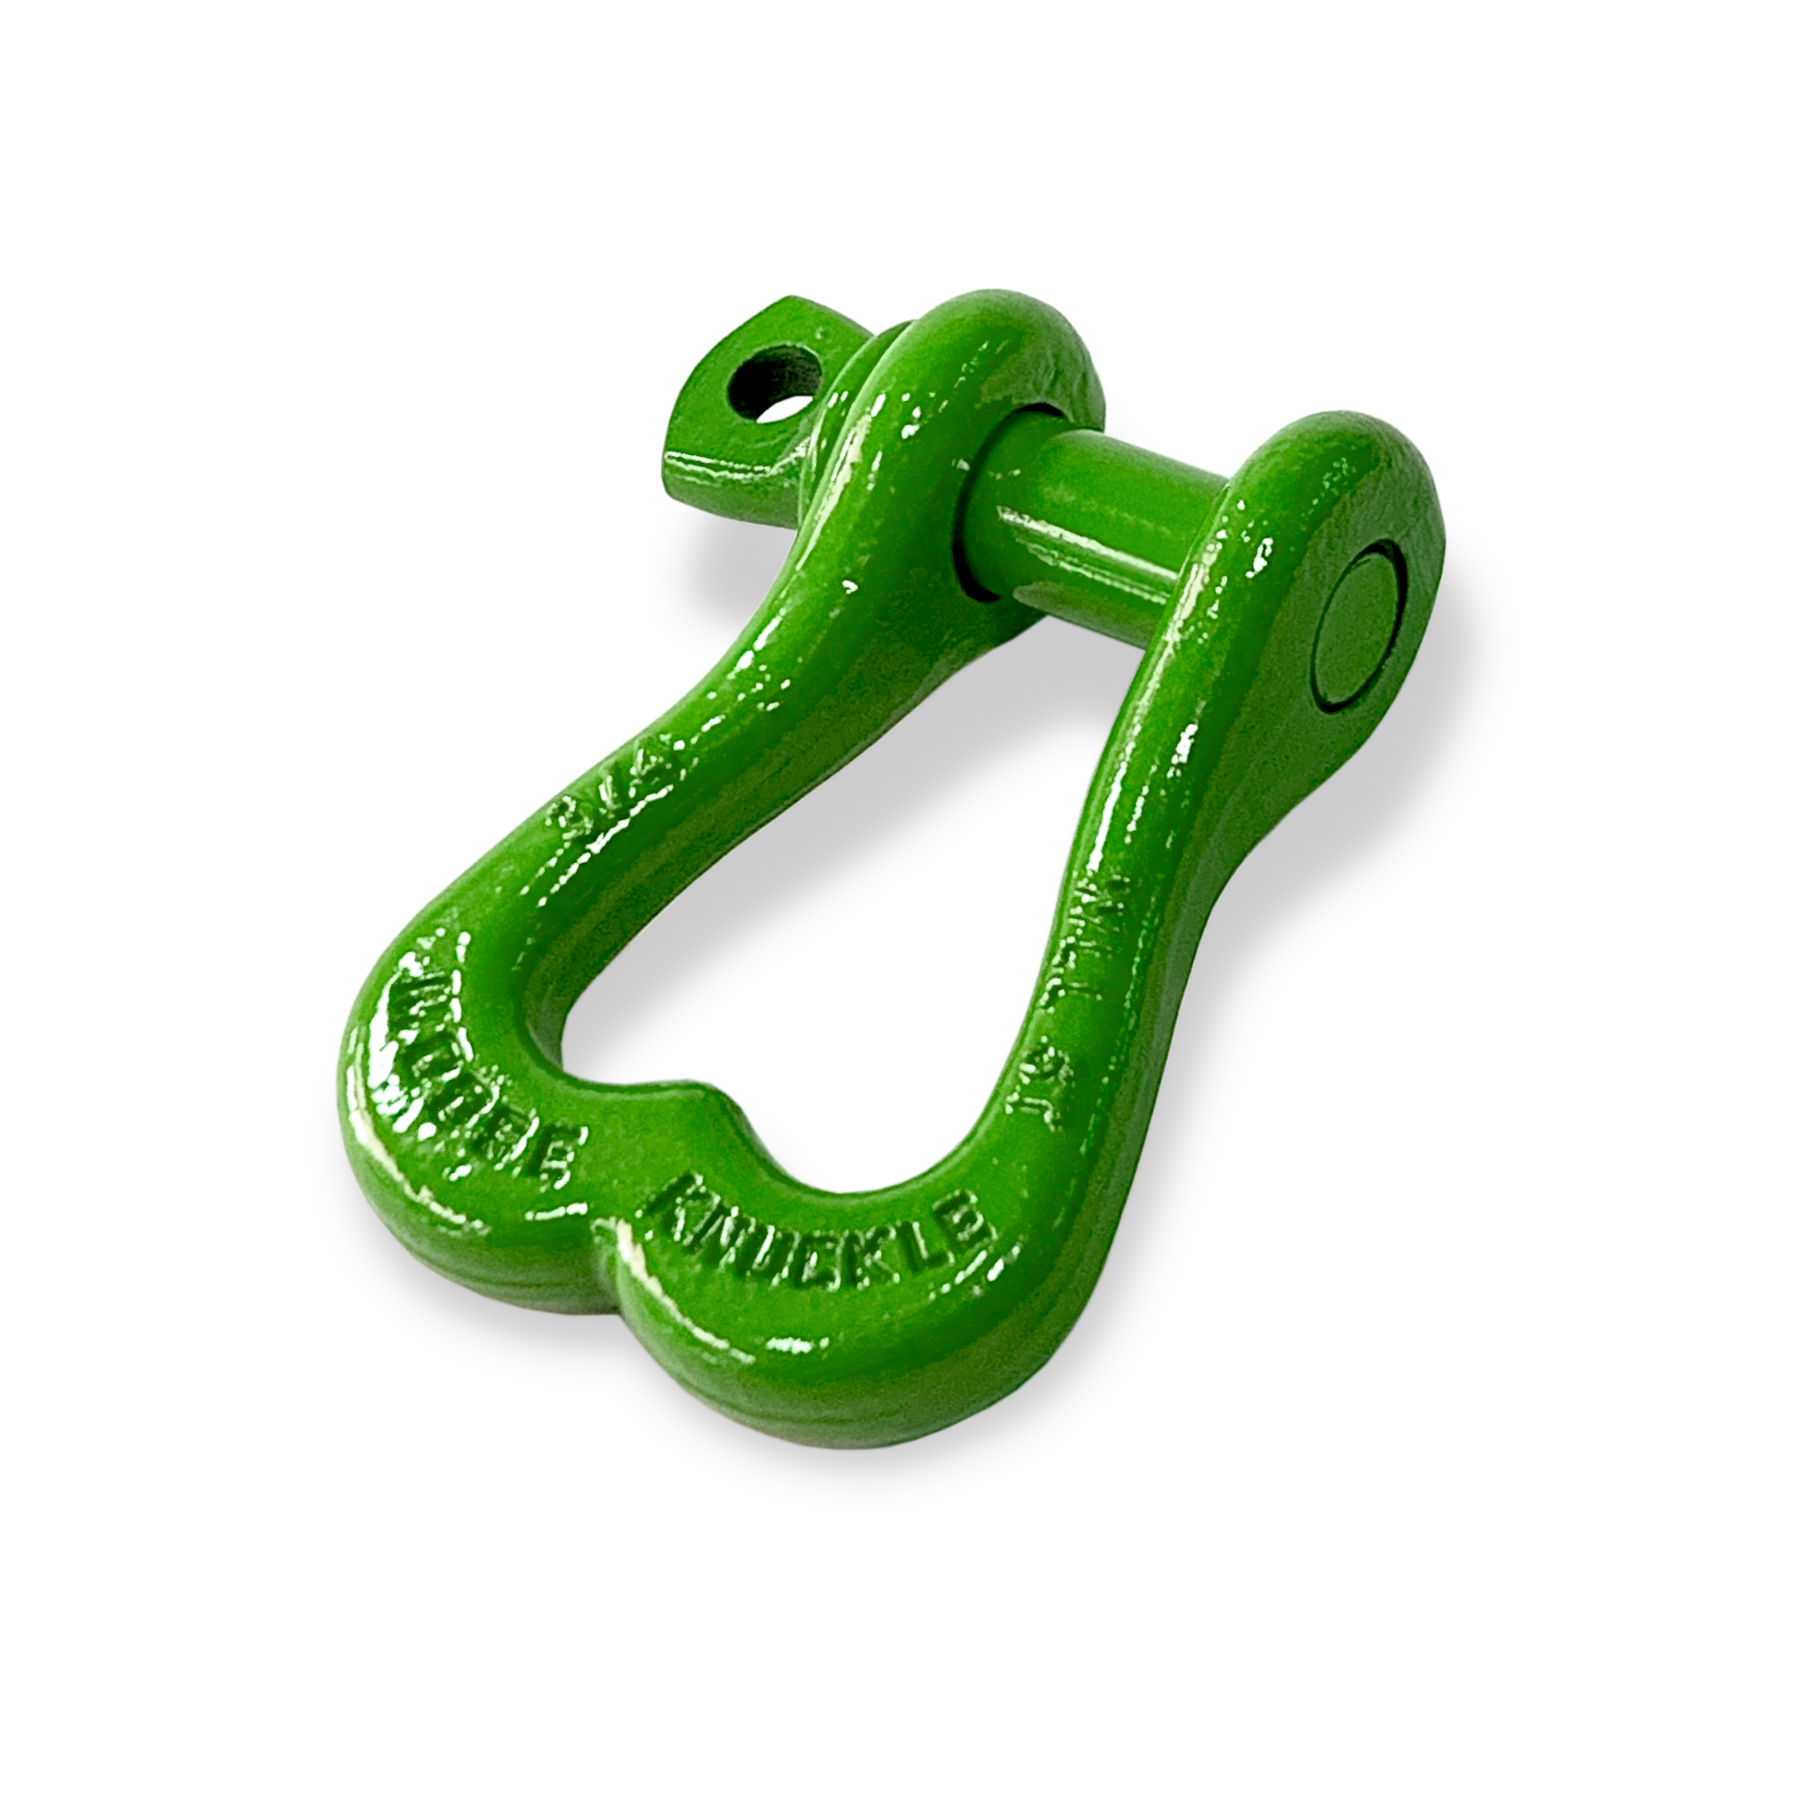 Moose Knuckle XL Sublime Green Powder Coated Colored Shackle for Tow Straps, Off Roading and Truck Nuts Vehicle Recovery